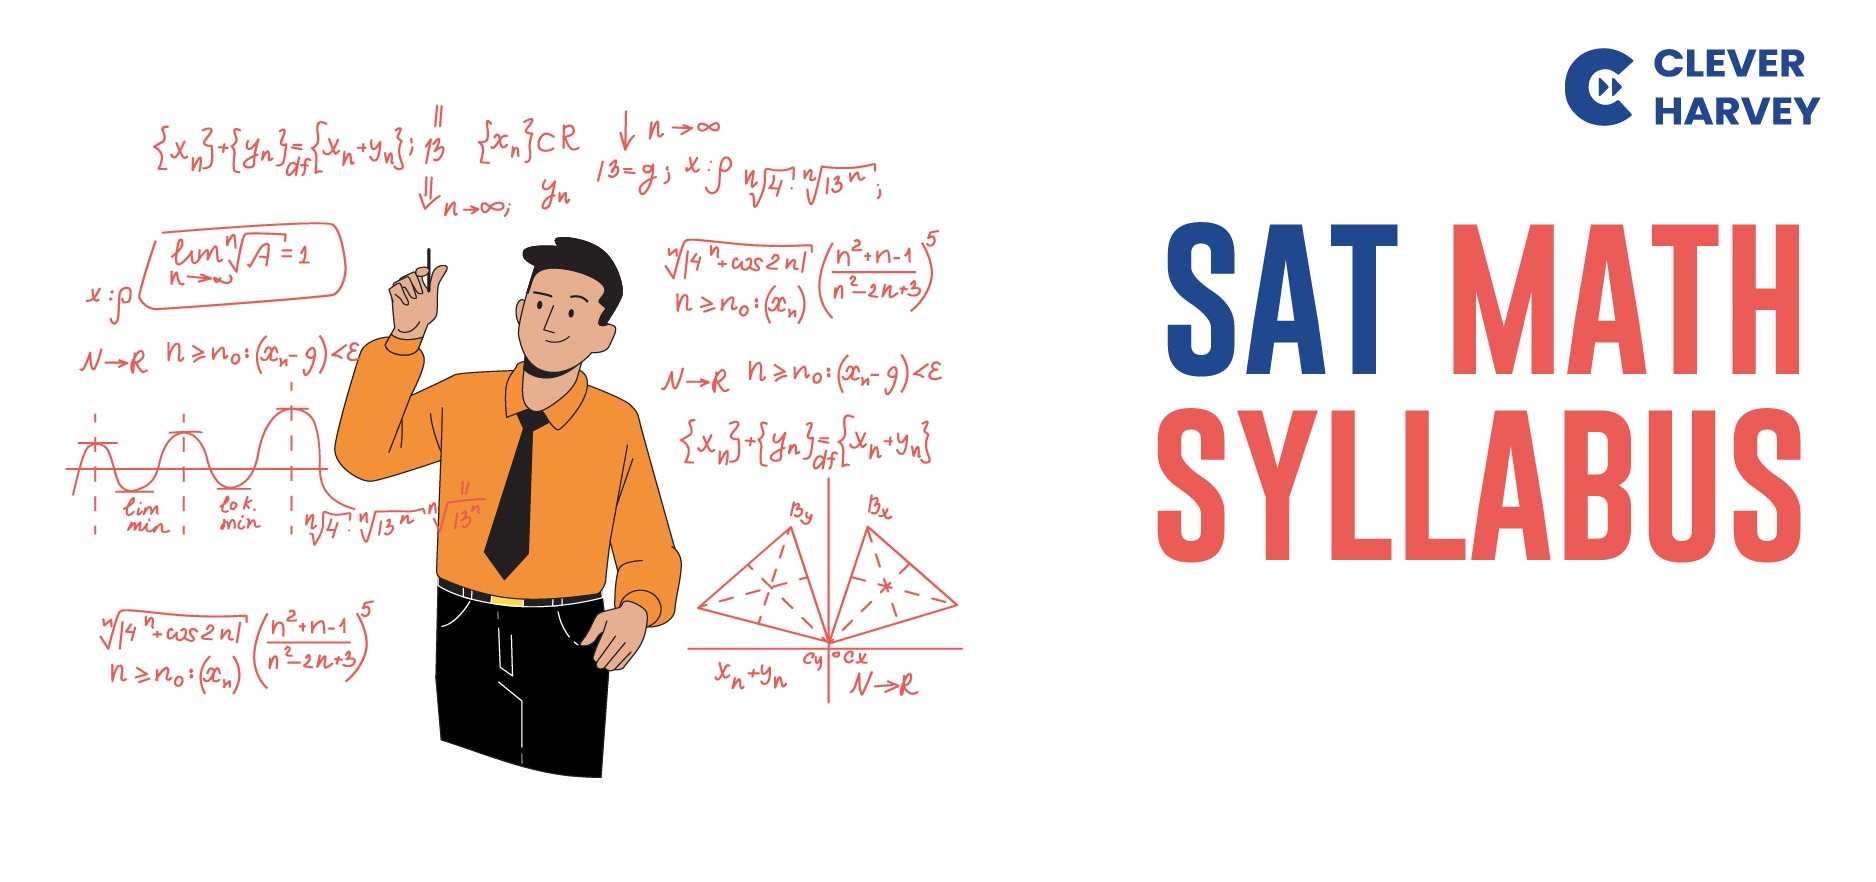 SAT Maths Syllabus 2022 Clever Harvey Guide